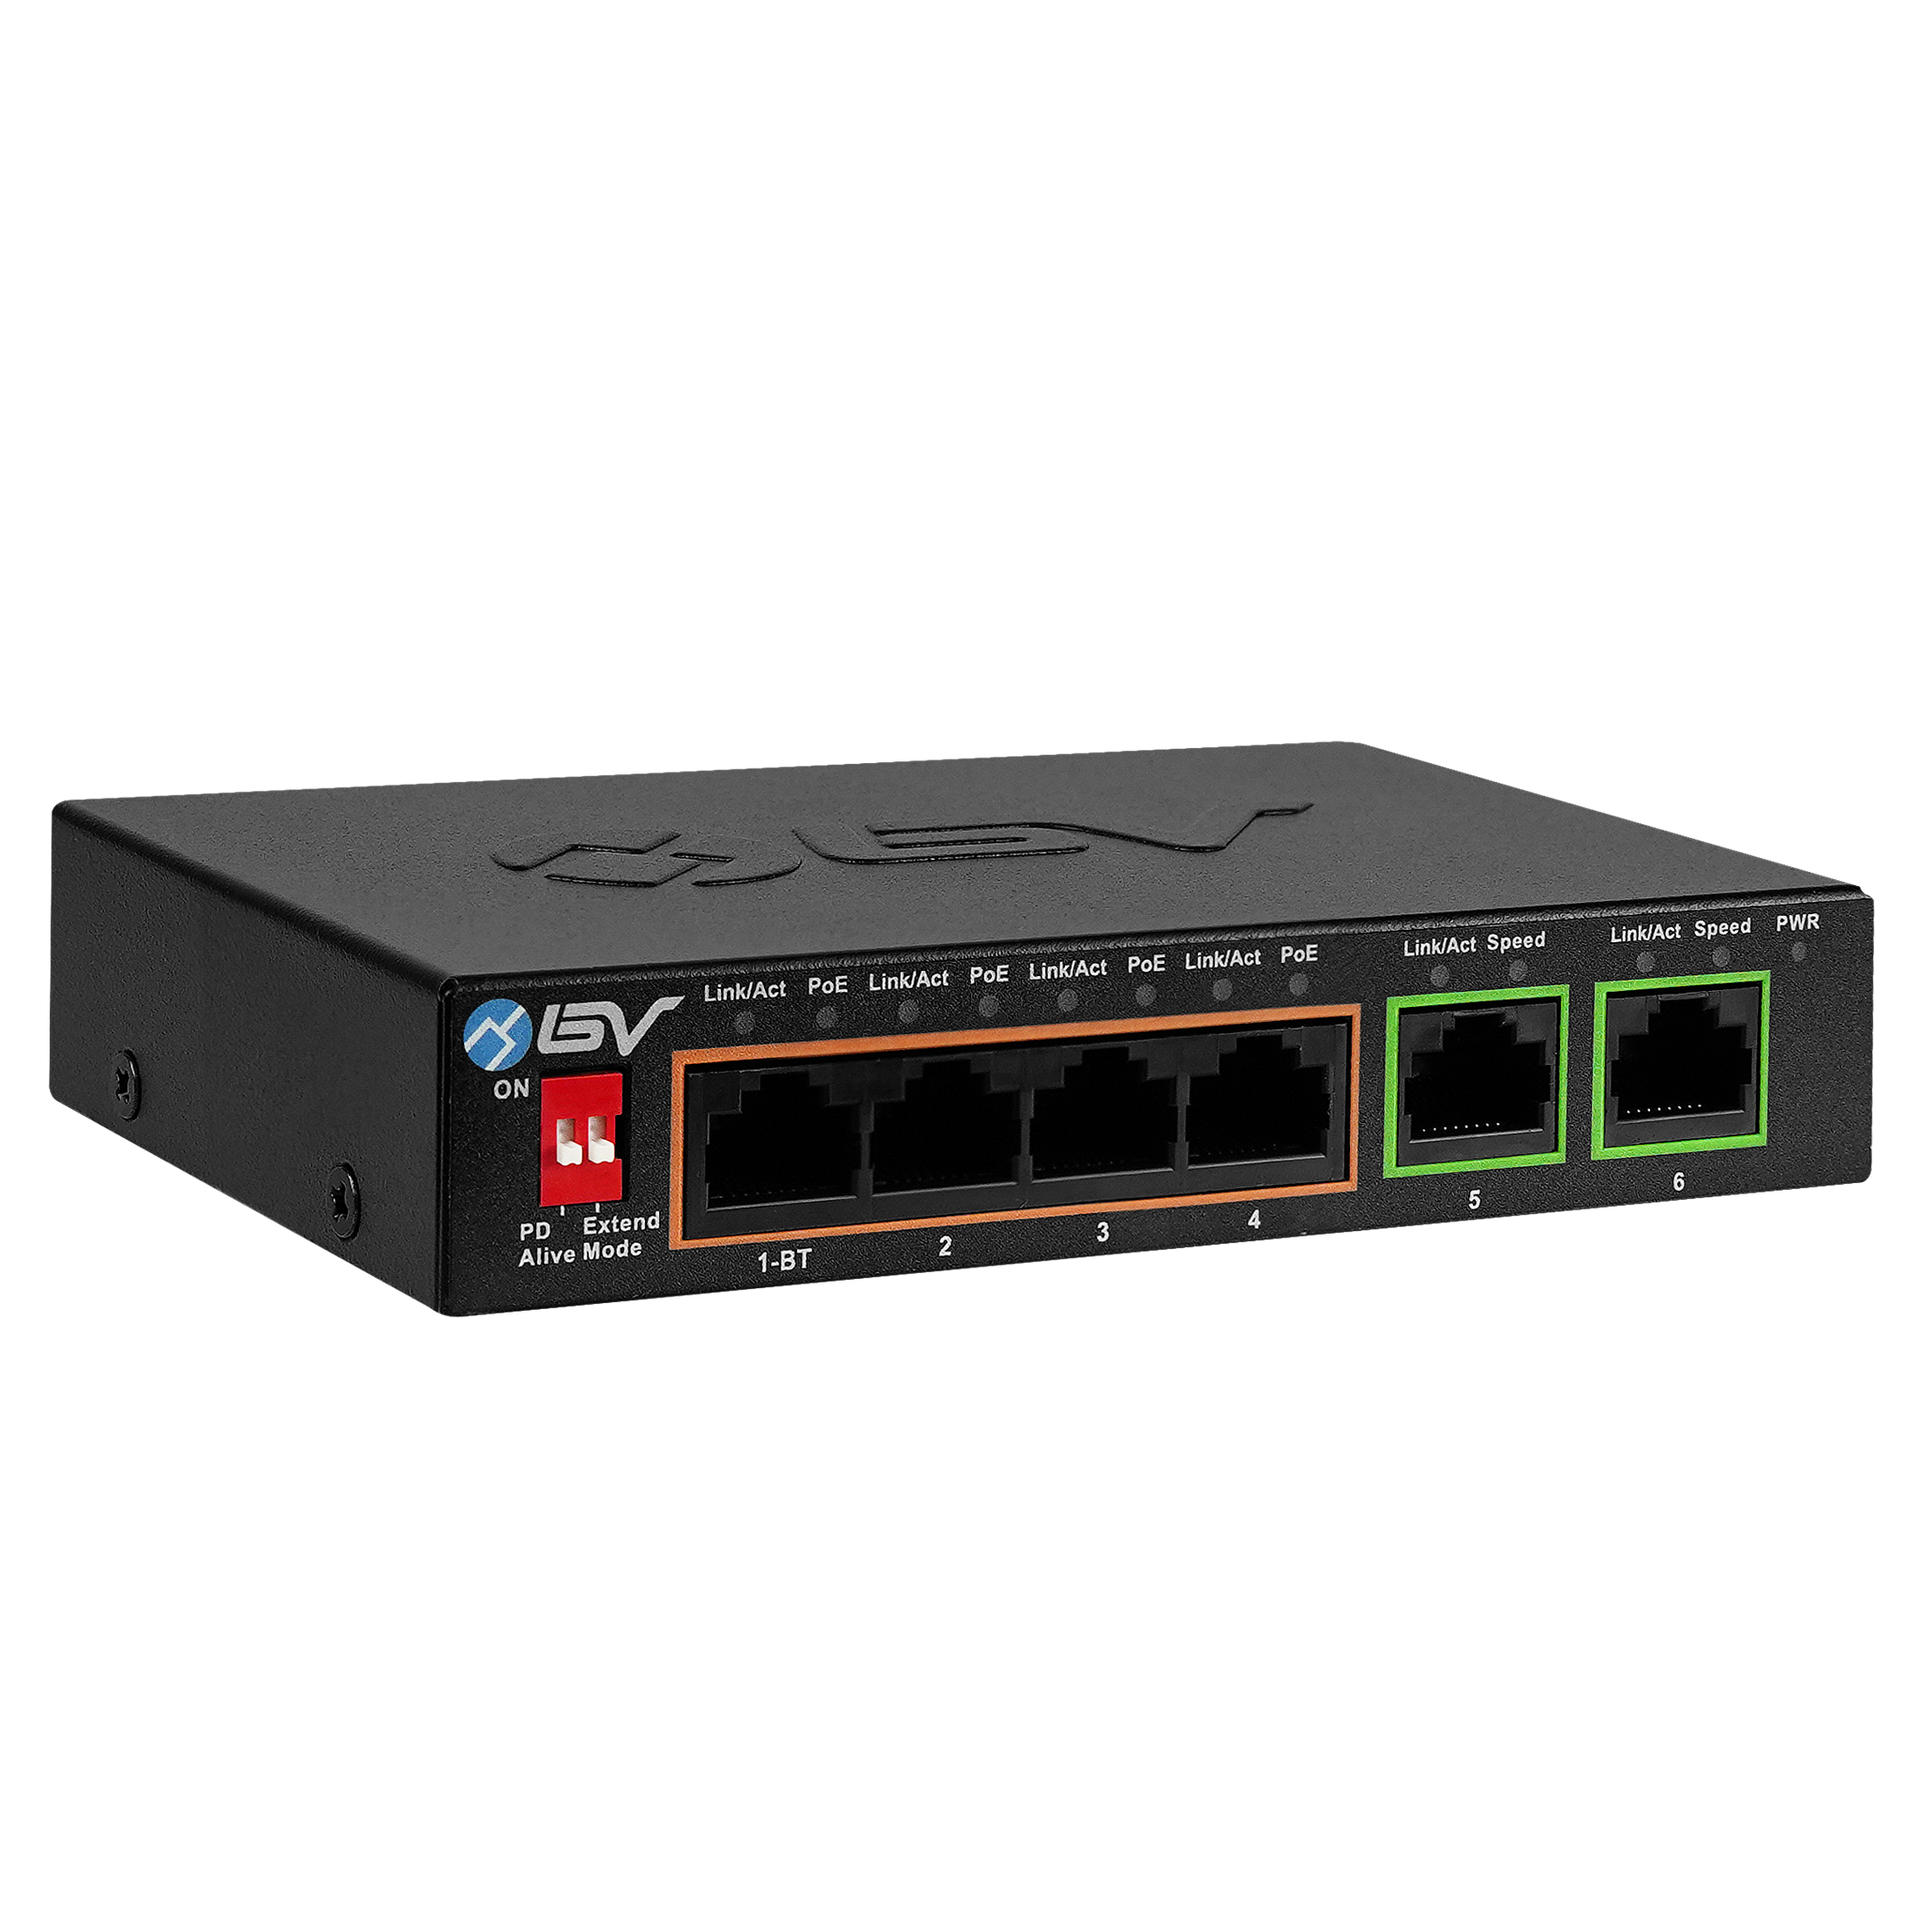 Guide d'achat : Switch Ethernet à 48 ports